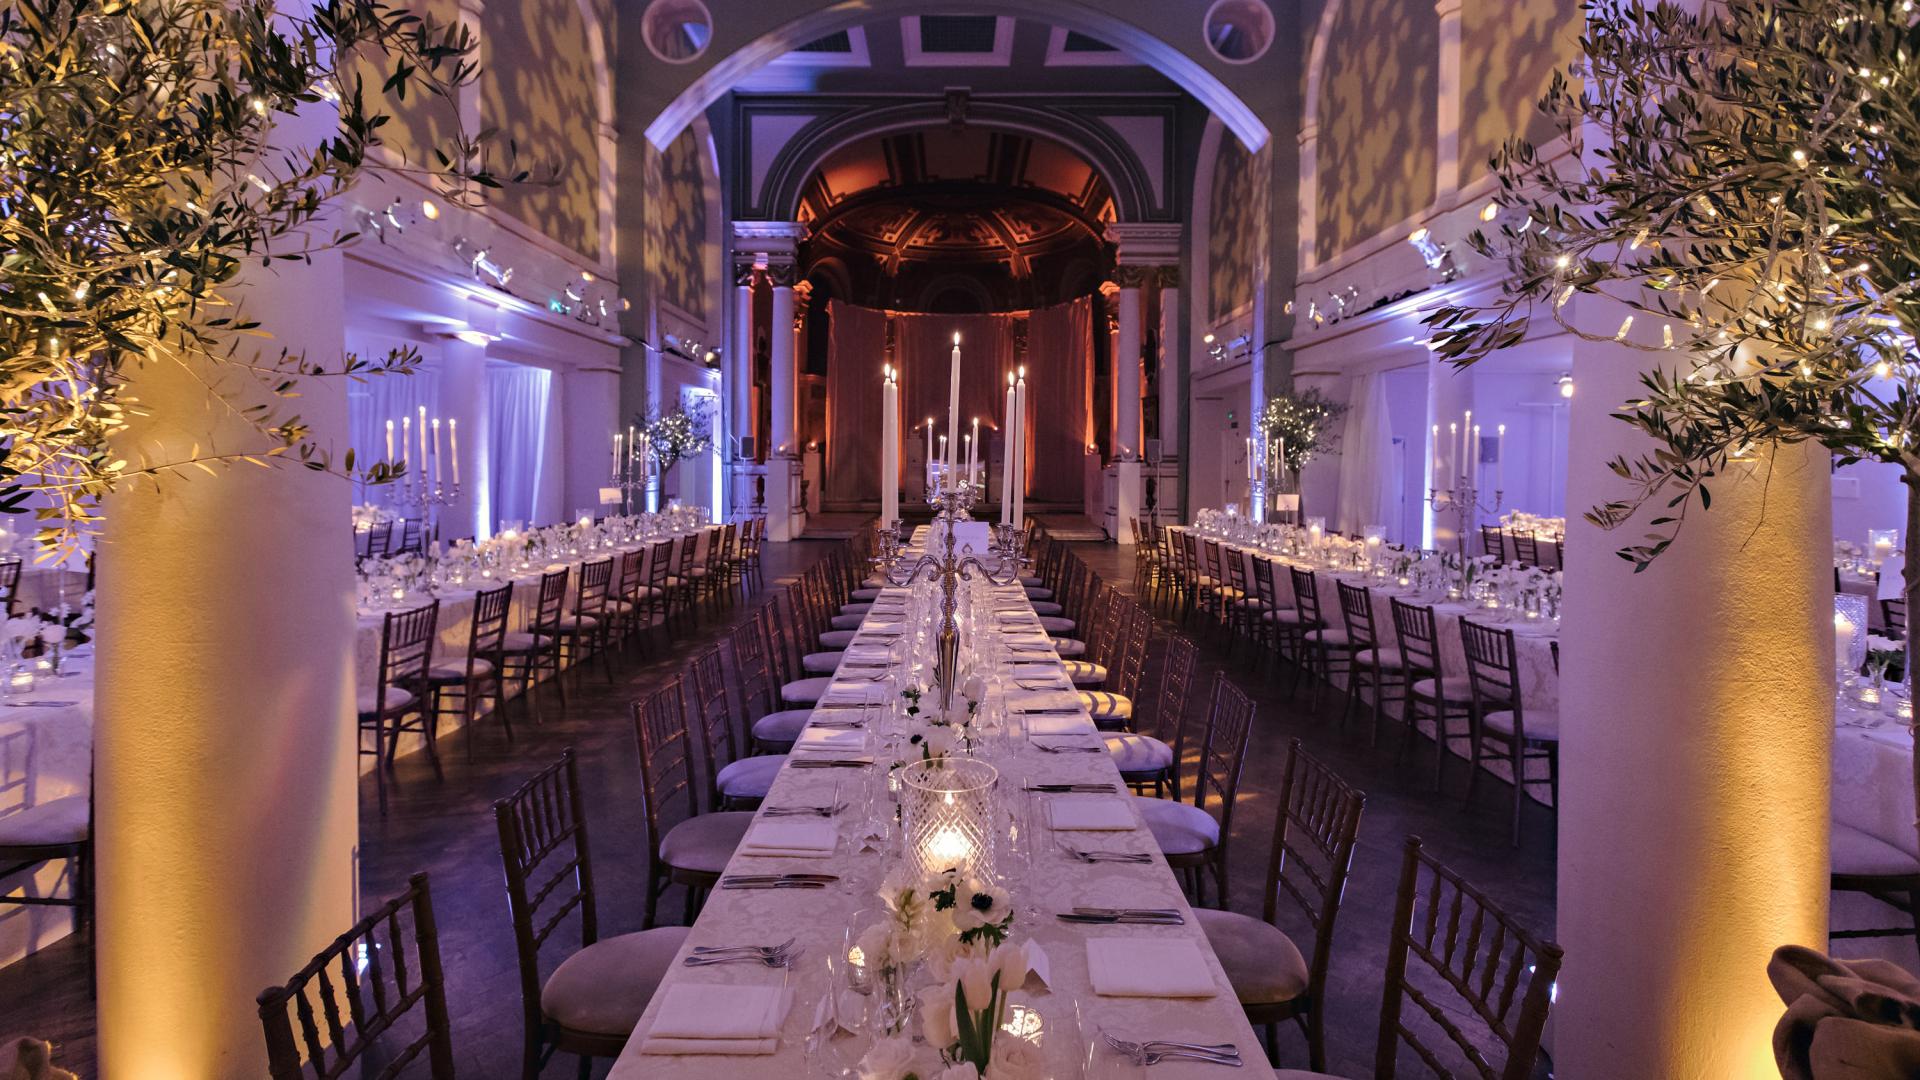 Find your Asian Wedding Venue in London